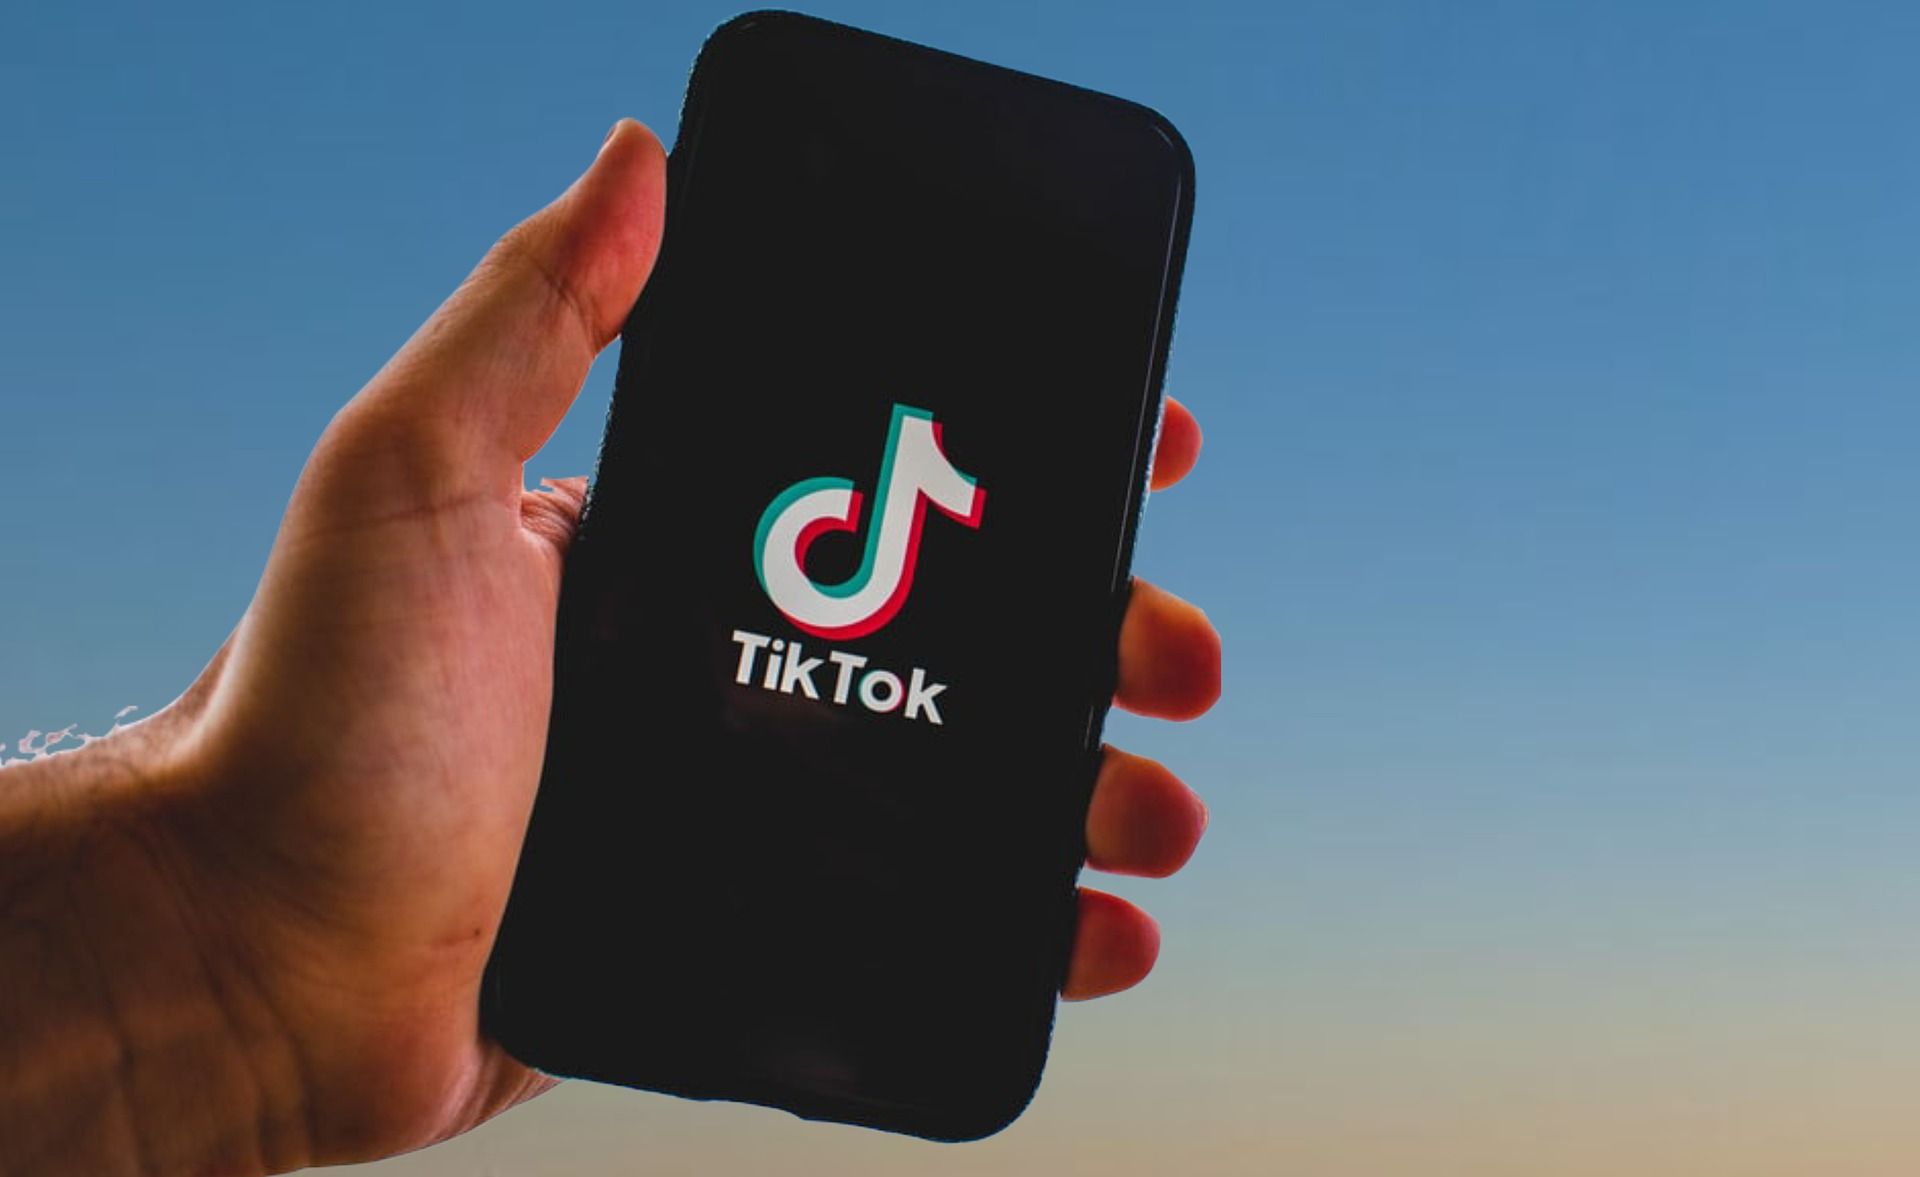 TikTok Youth Council: 世界中の 15 人の十代の若者たちが意思決定を行う